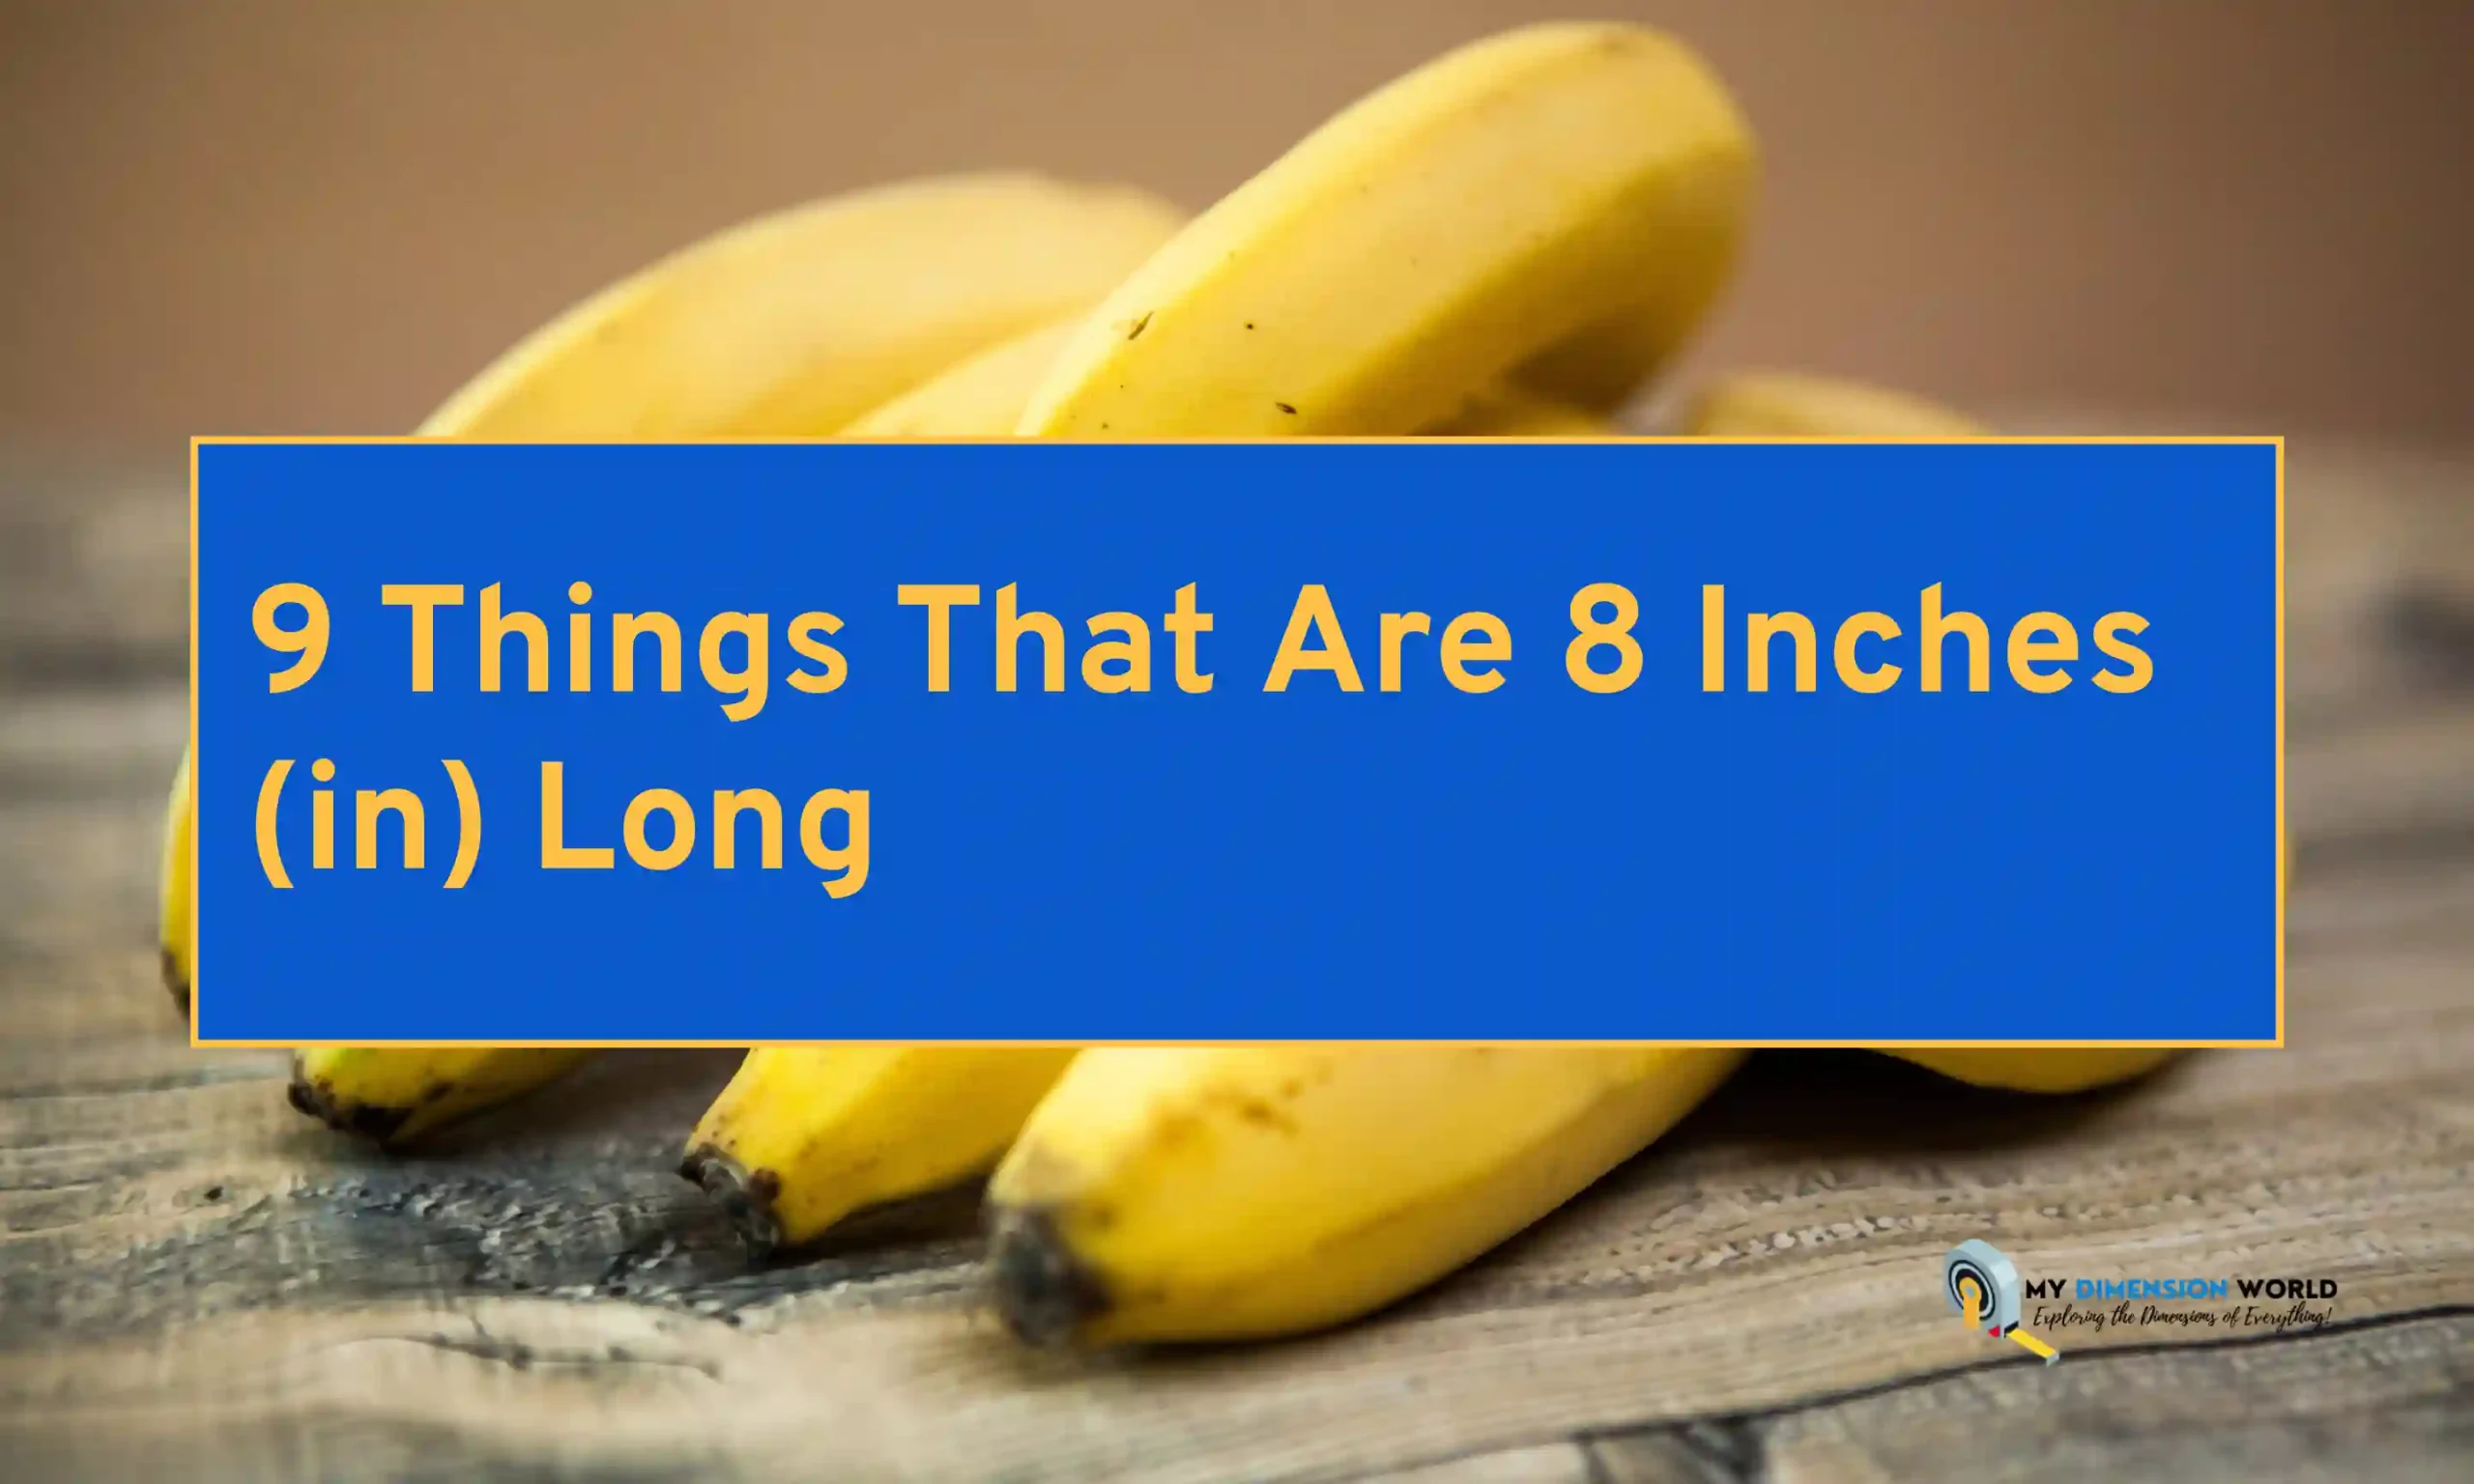 9 Things That Are 8 Inches (in) Long